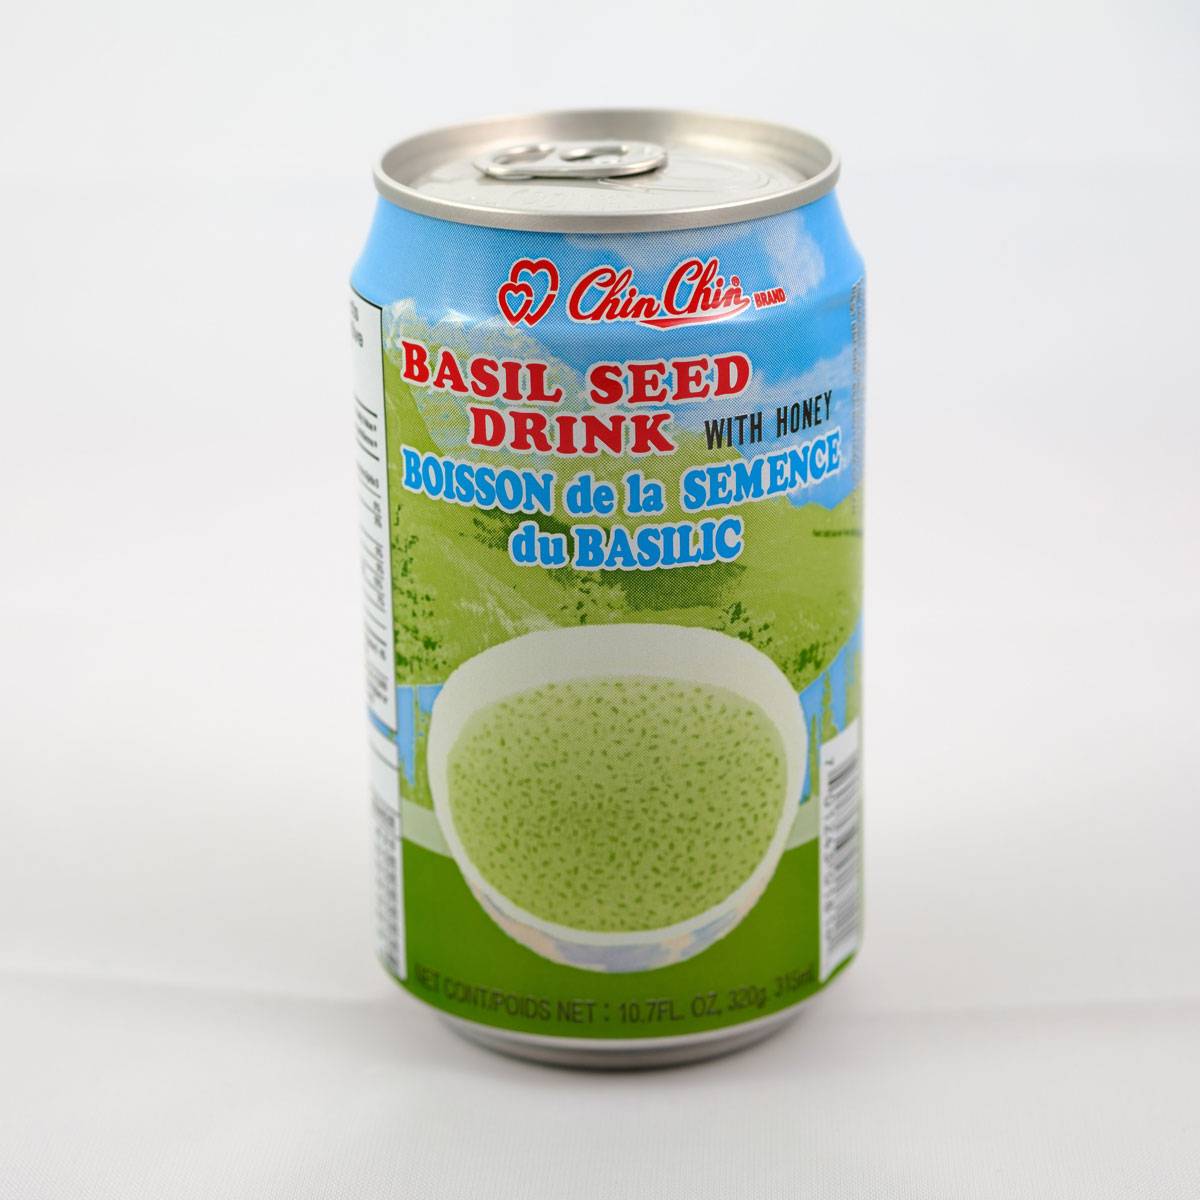 Basil Seed Drink with Honey 315ml (VGT)